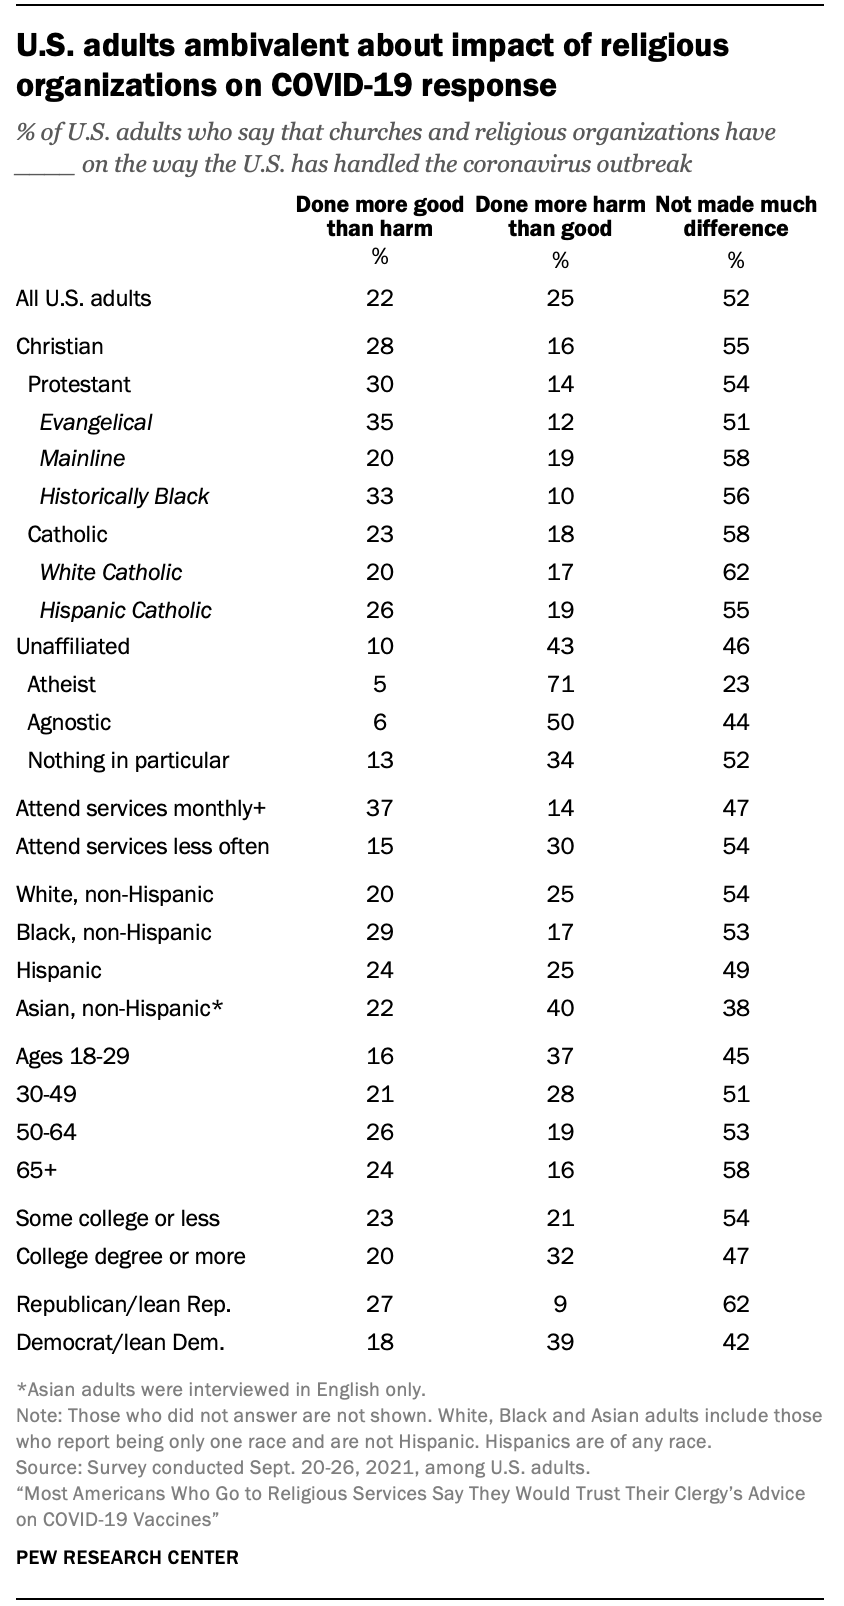 U.S. adults ambivalent about impact of religious organizations on COVID-19 response